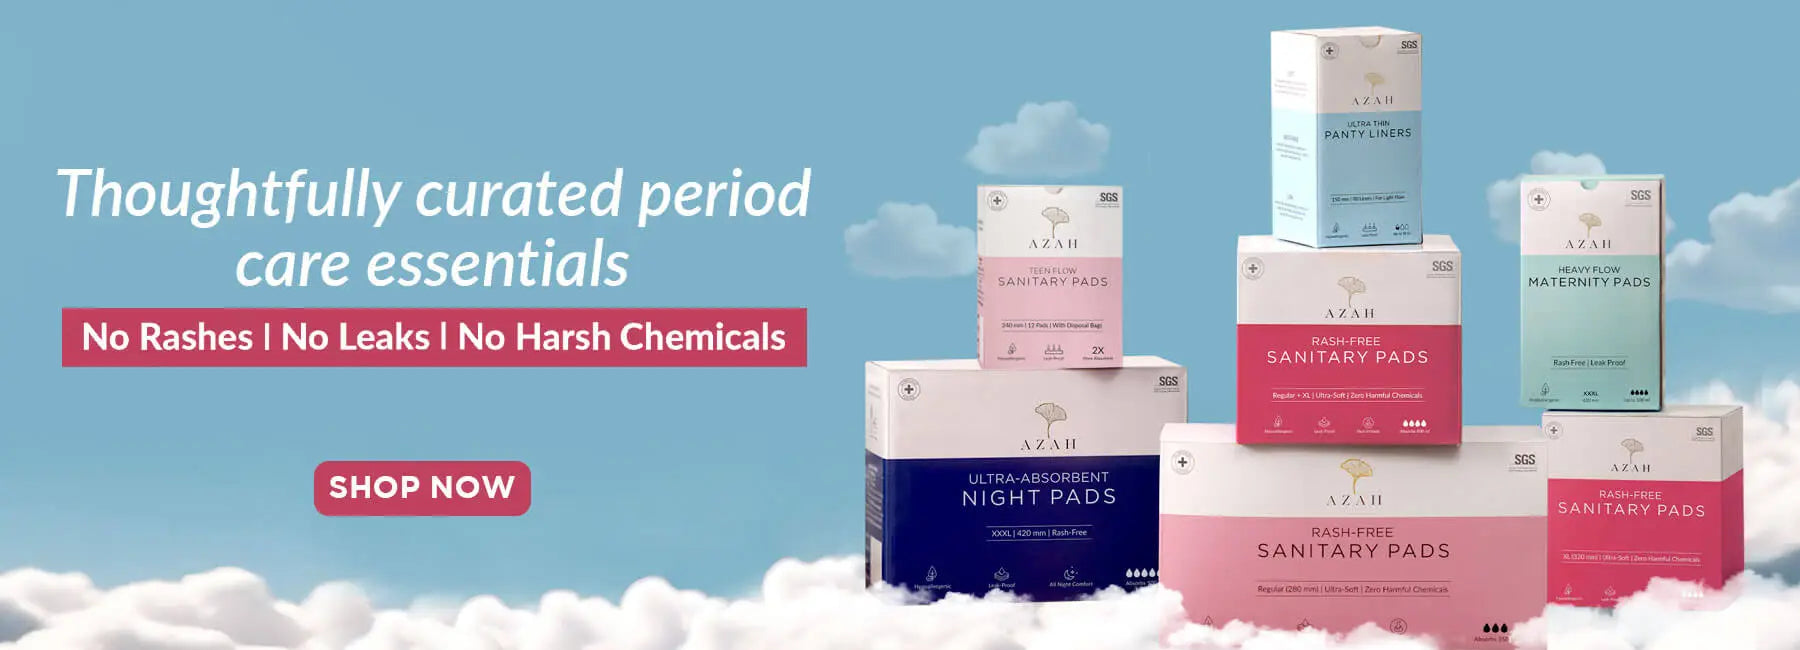 Night Pads - Thoughtfully curated period care essentials